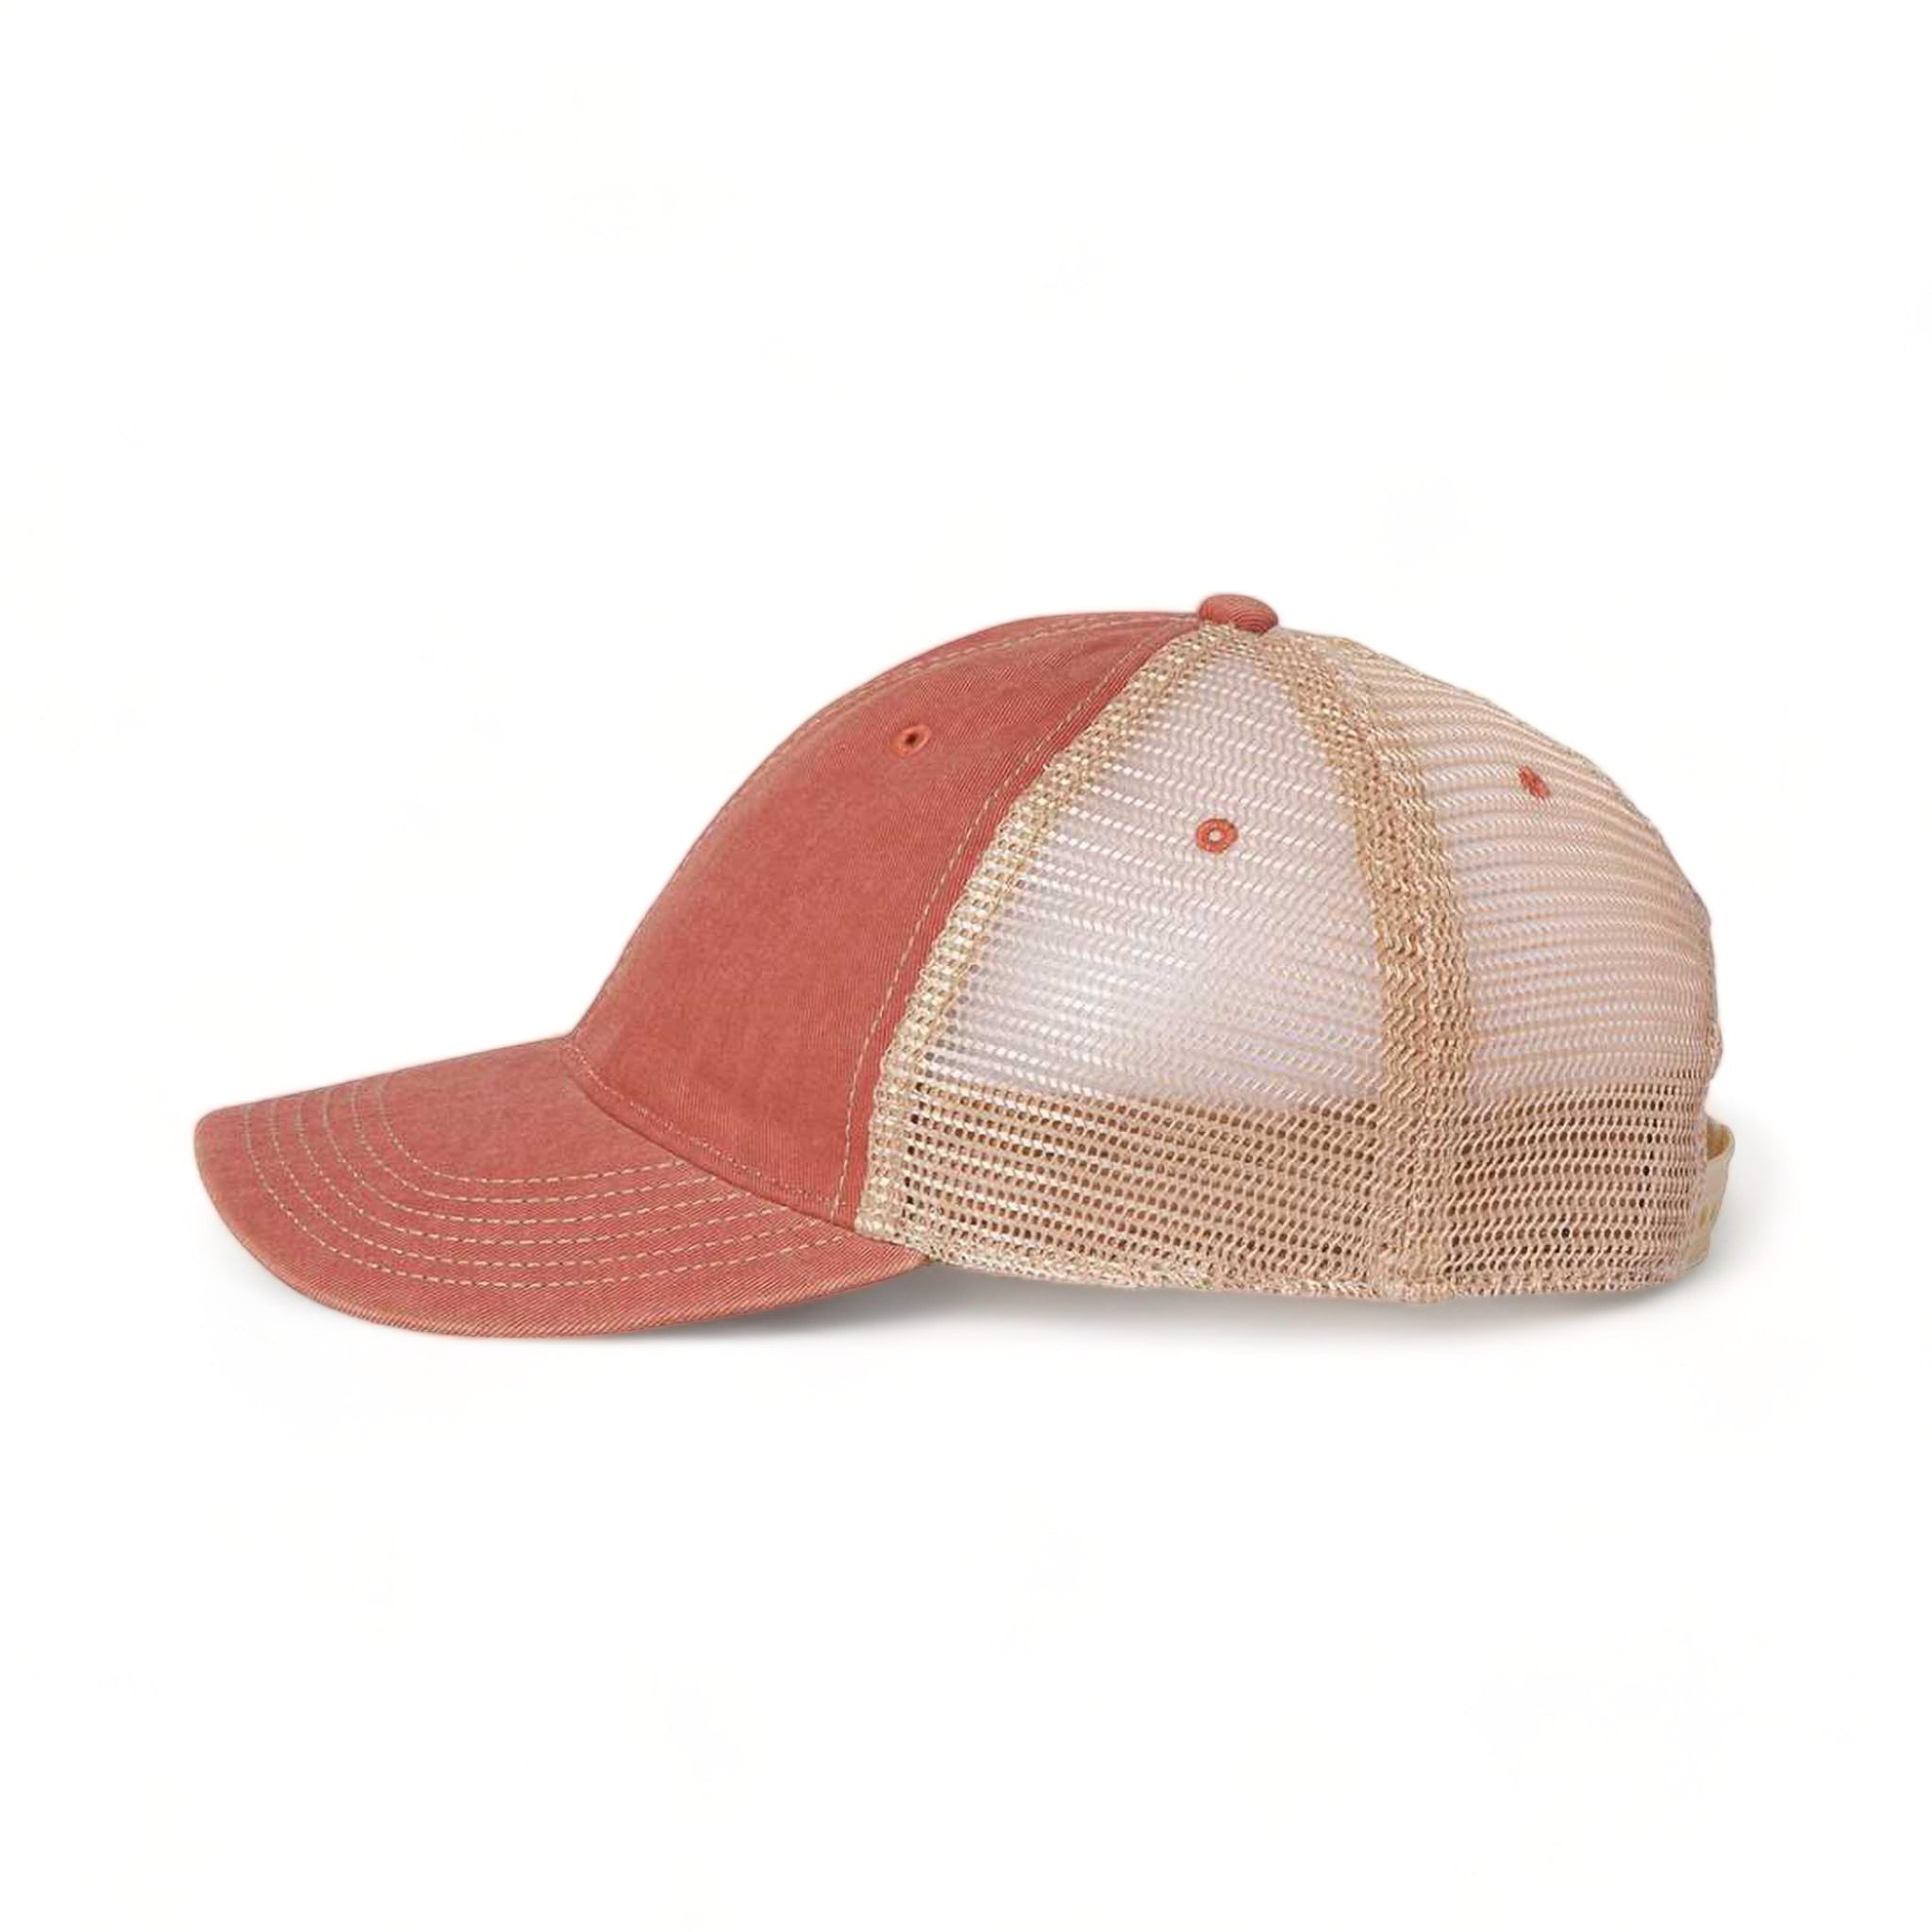 Side view of LEGACY OFA custom hat in nantucket red and khaki